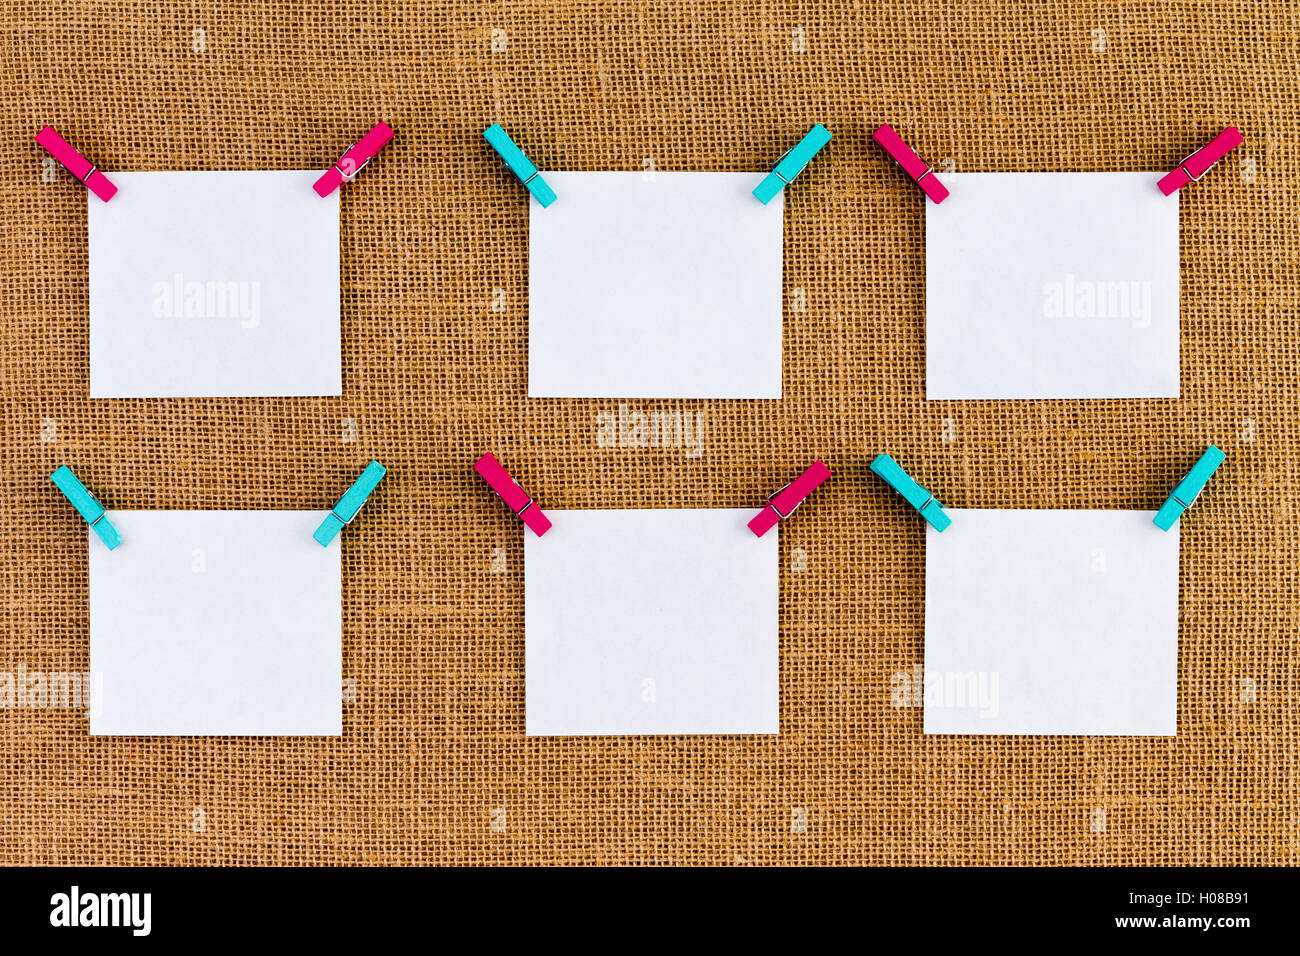 Six neatly aligned blank white notepads suspended from alternating blue and pink wooden clothespins over rustic burlap or hessia Stock Photo